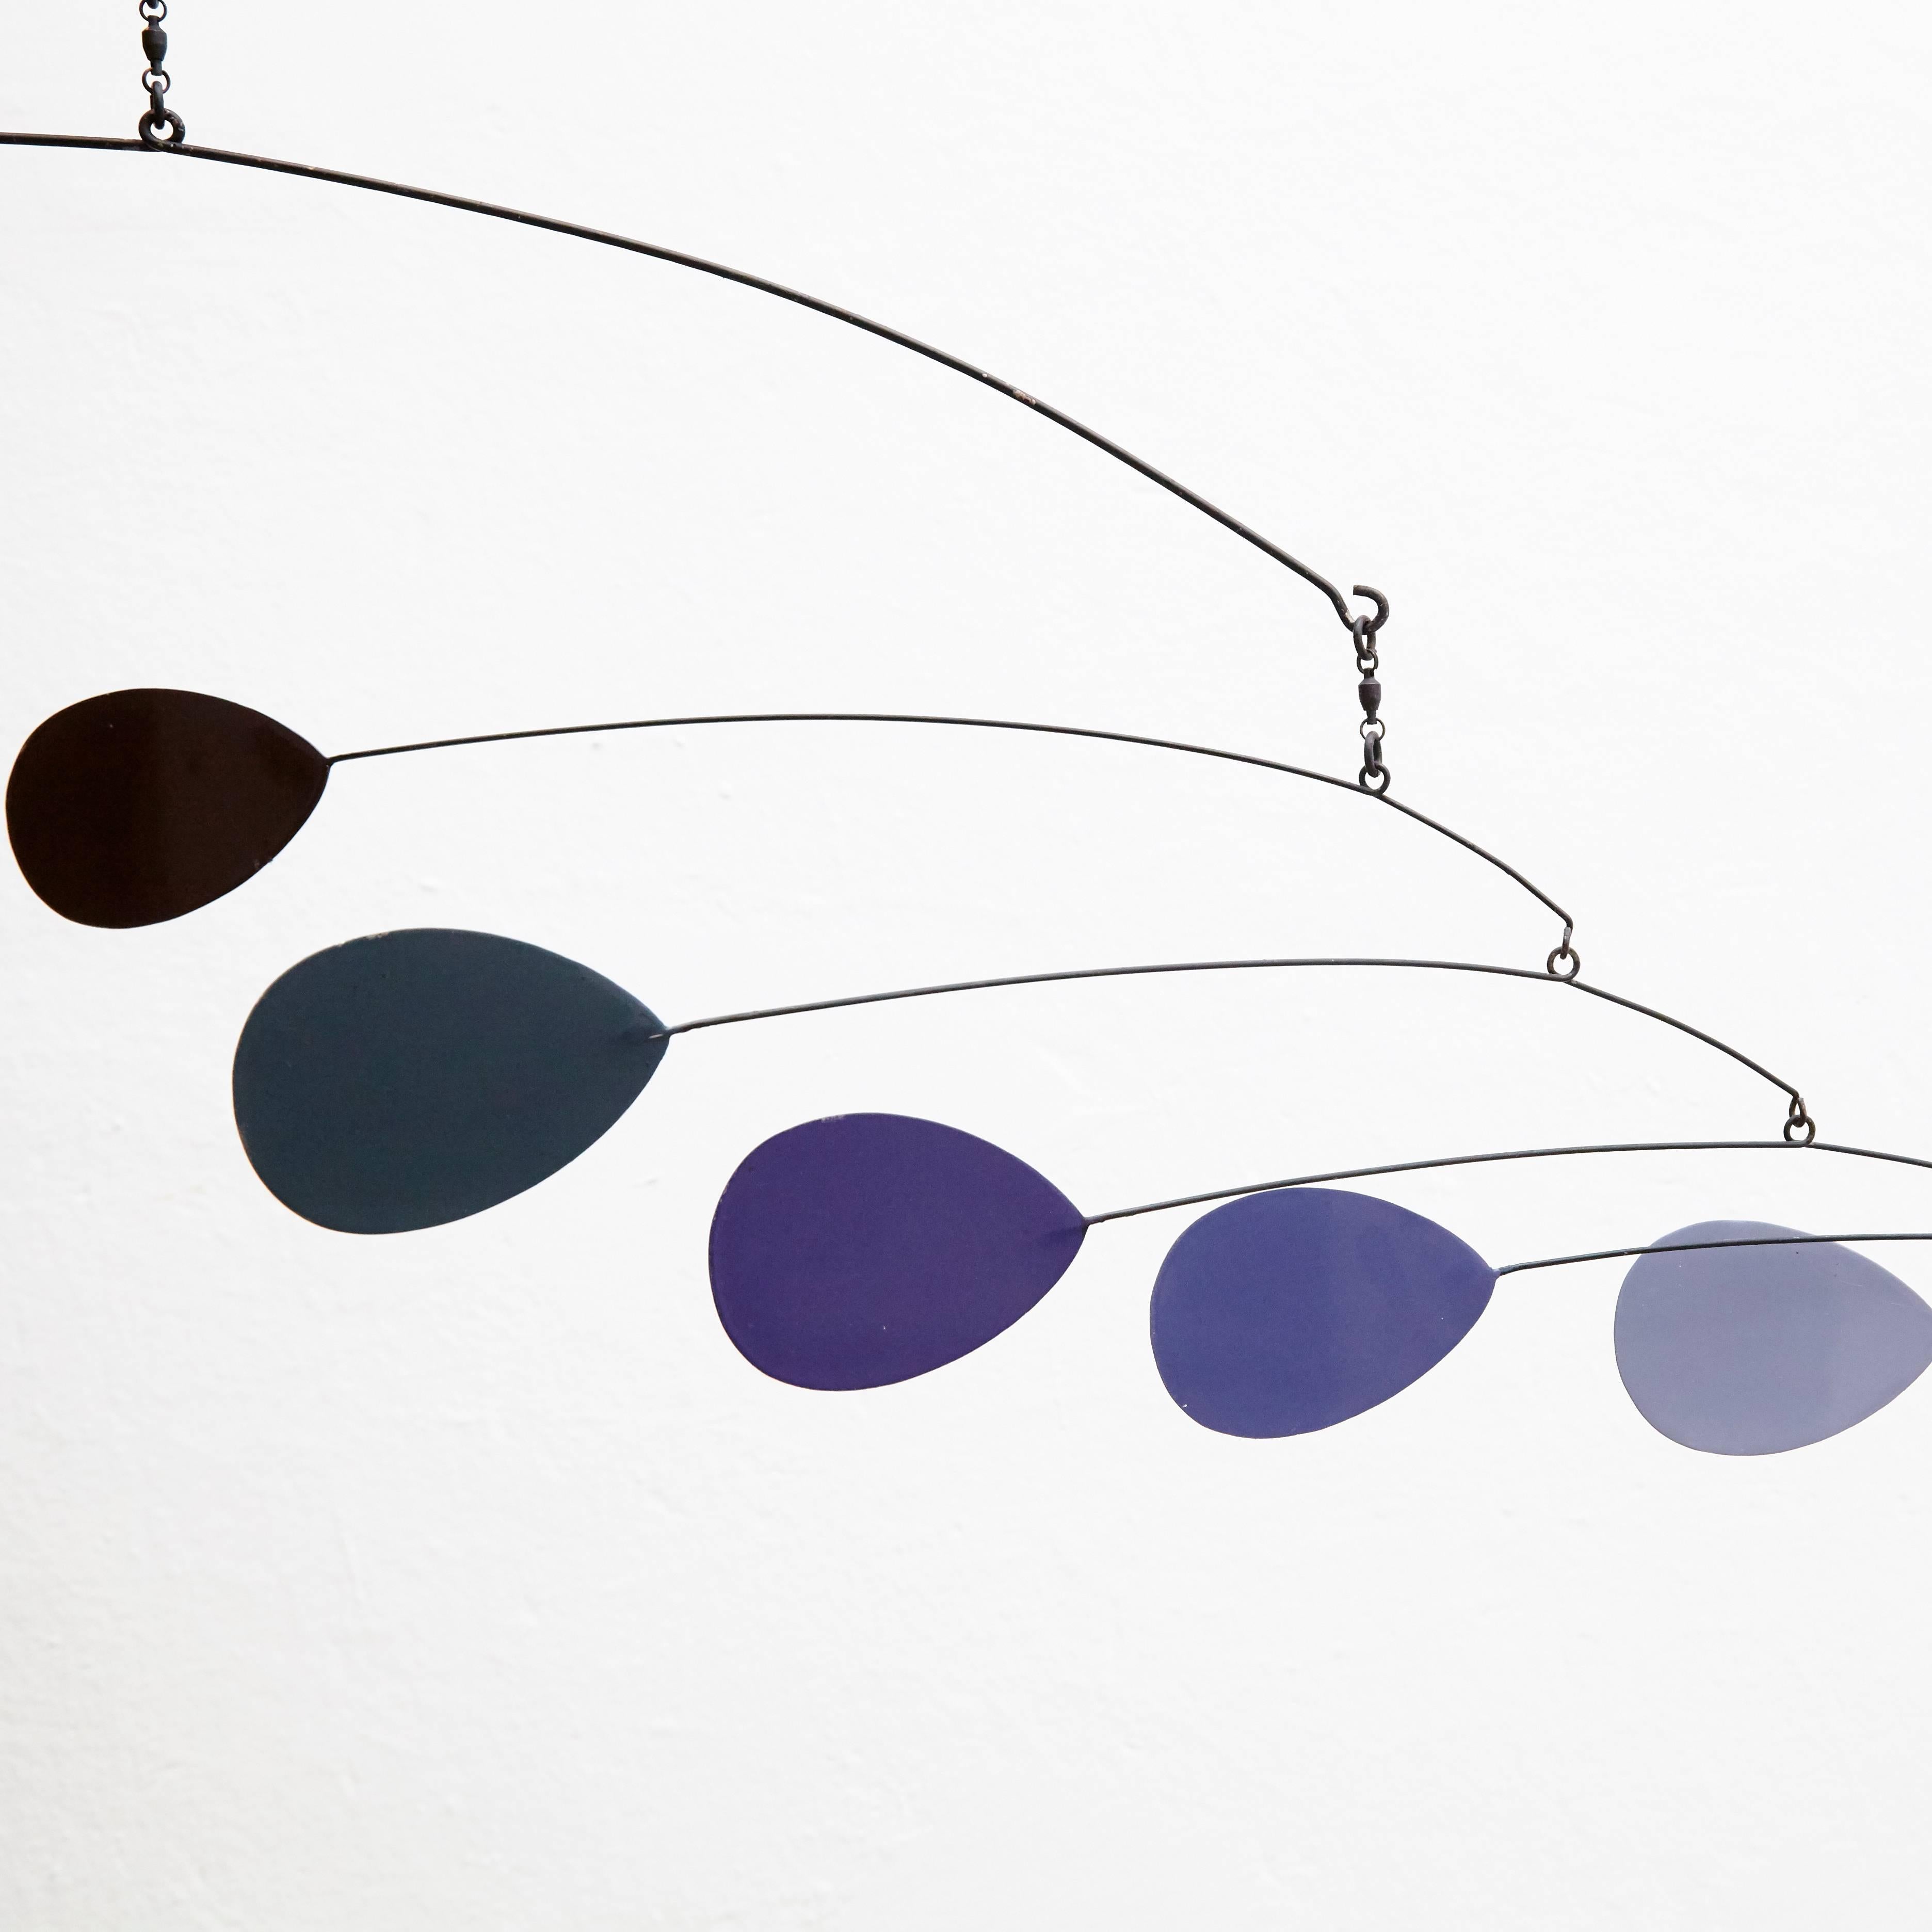 Mid-Century Modern Hanging Sculpture in the Style of Alexander Calder